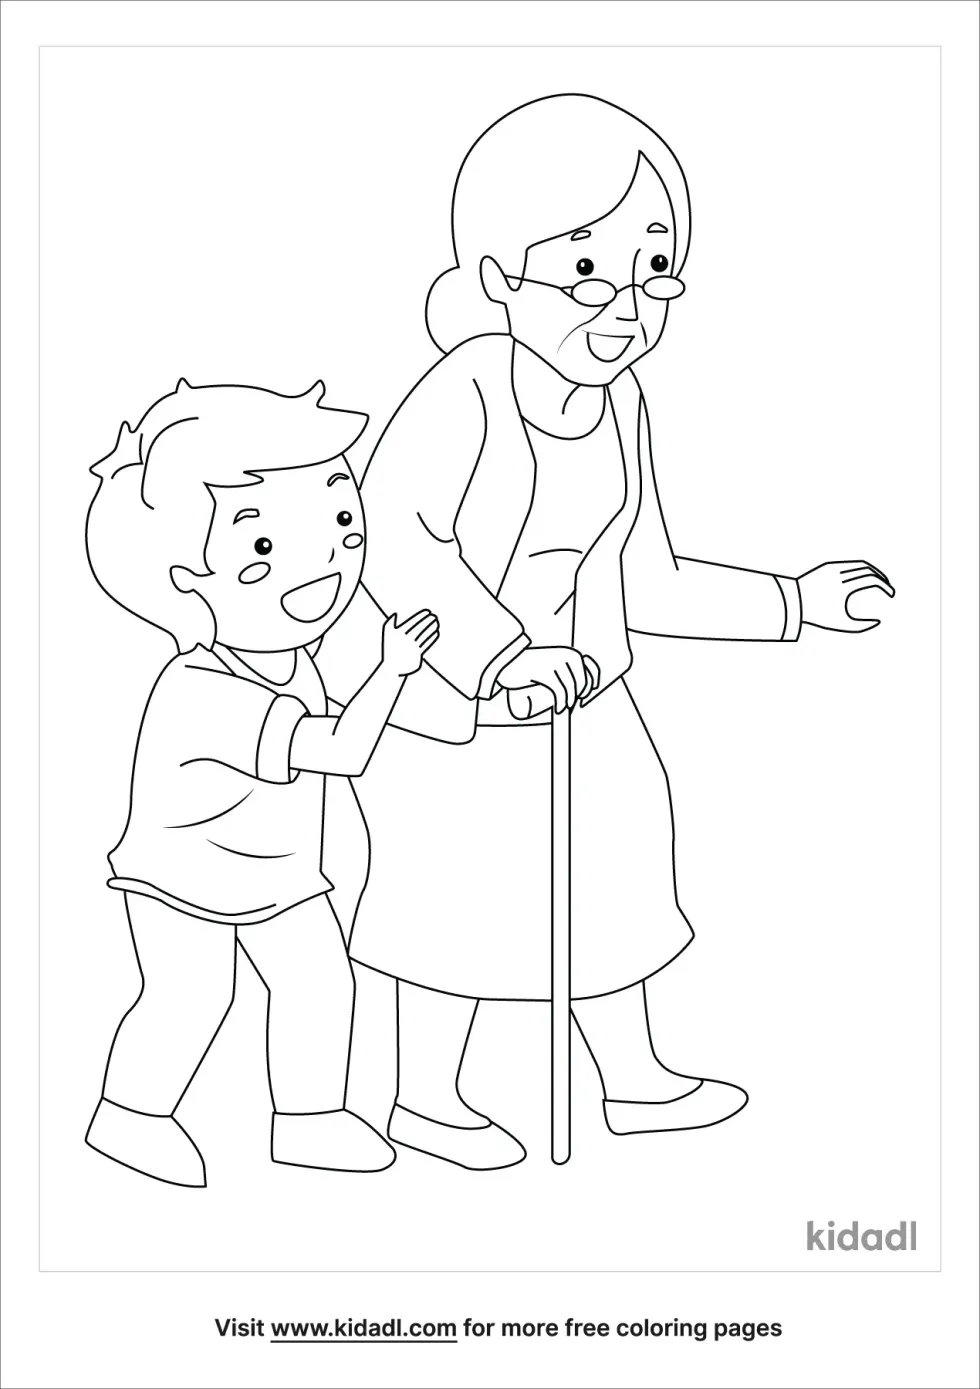 Dependability Coloring Page